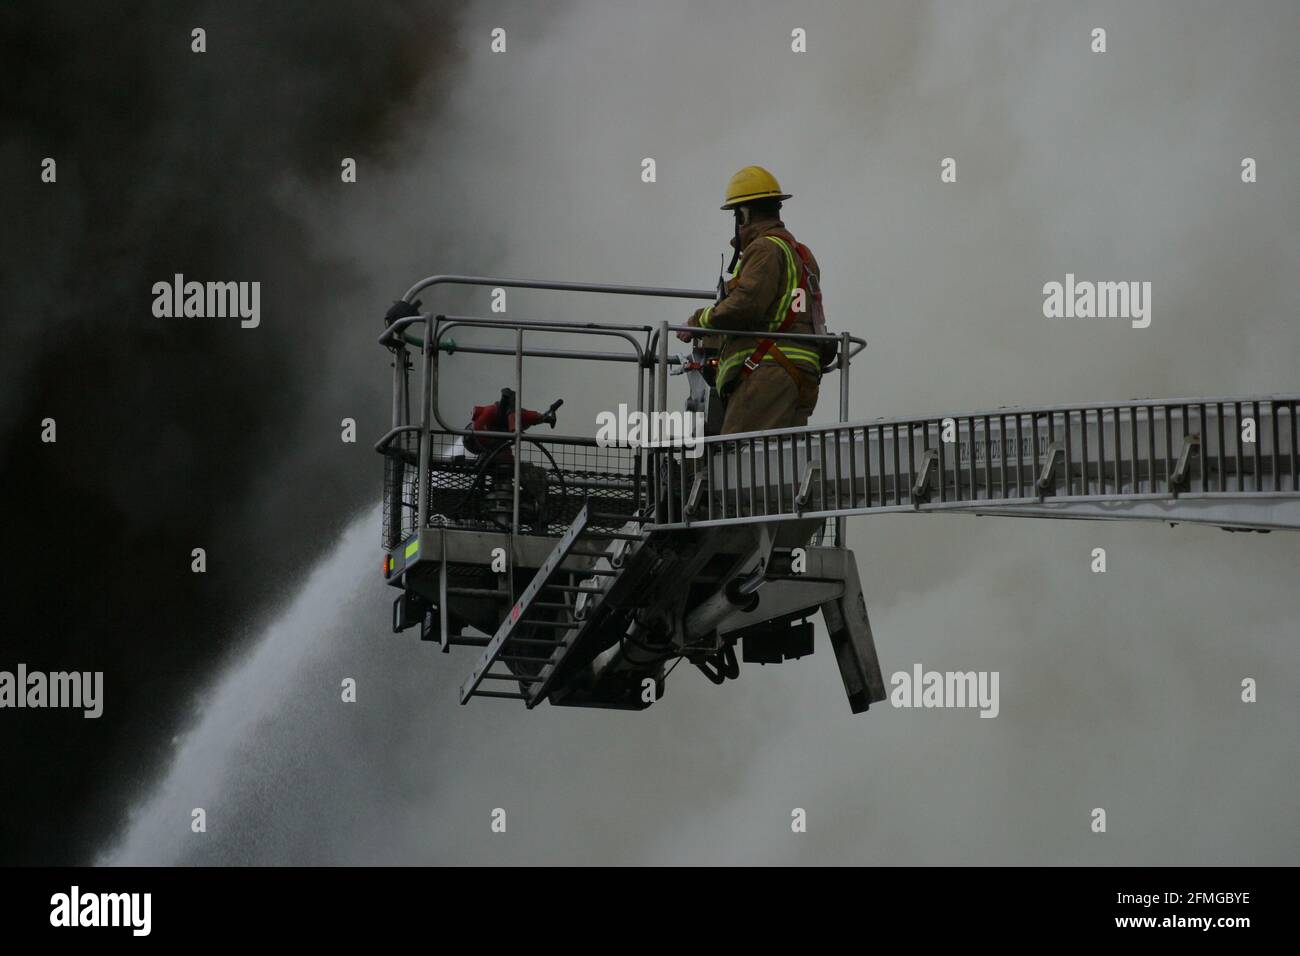 Burning building in Ayr, Ayrshire, Scotland, UK. Scottish Fire & rescue  Firefighters using  turntable ladder to fight fire in the roof of a burning building Stock Photo